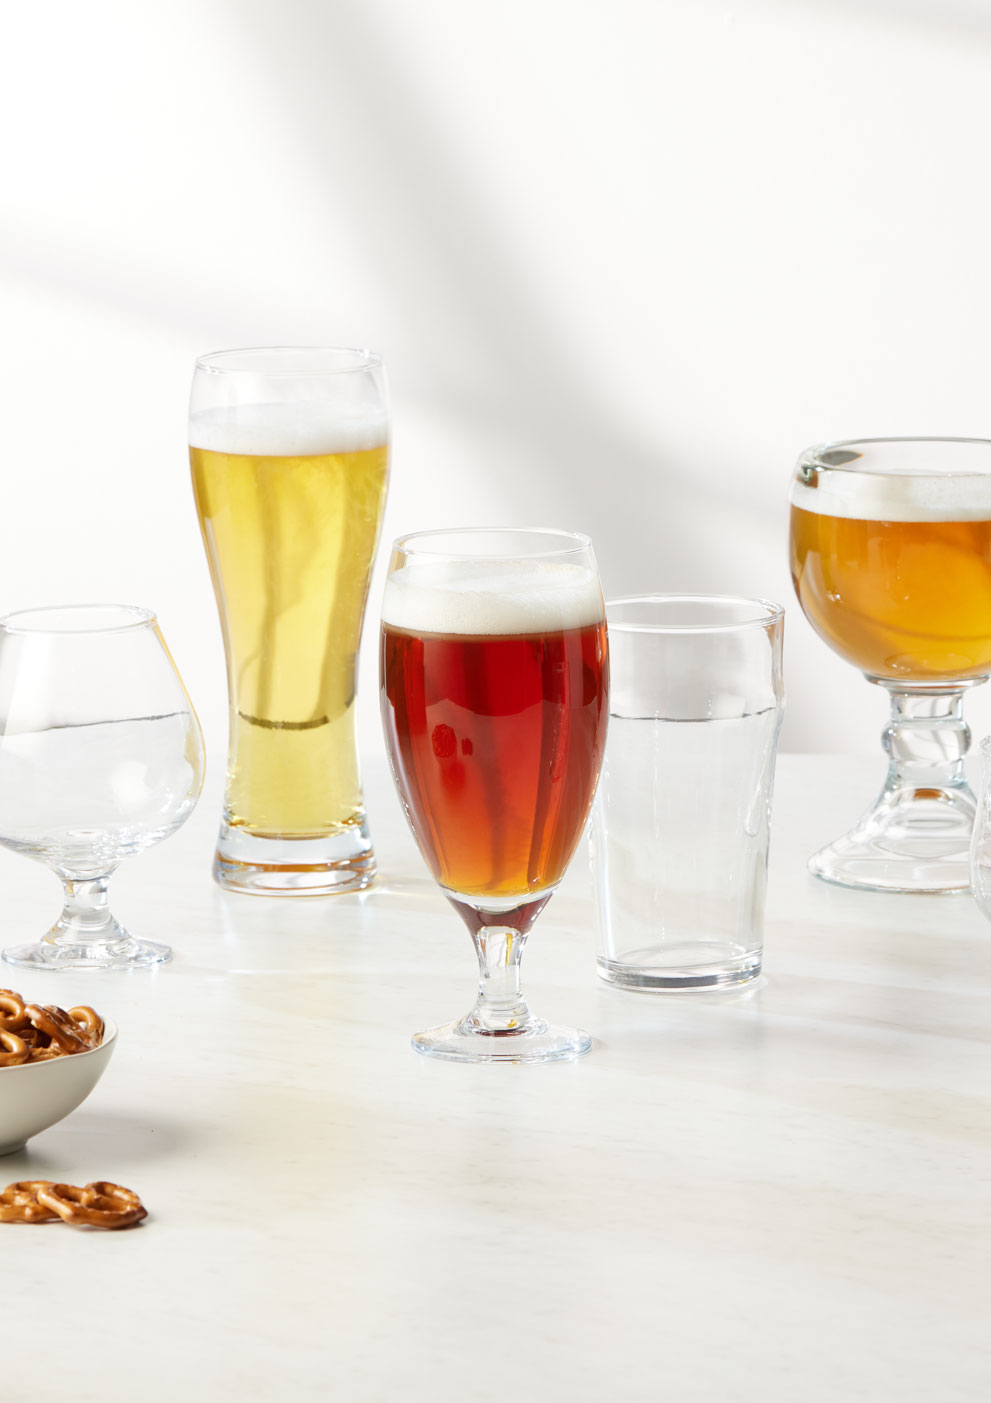 35 Different Types of Drinking Glasses & Their Uses